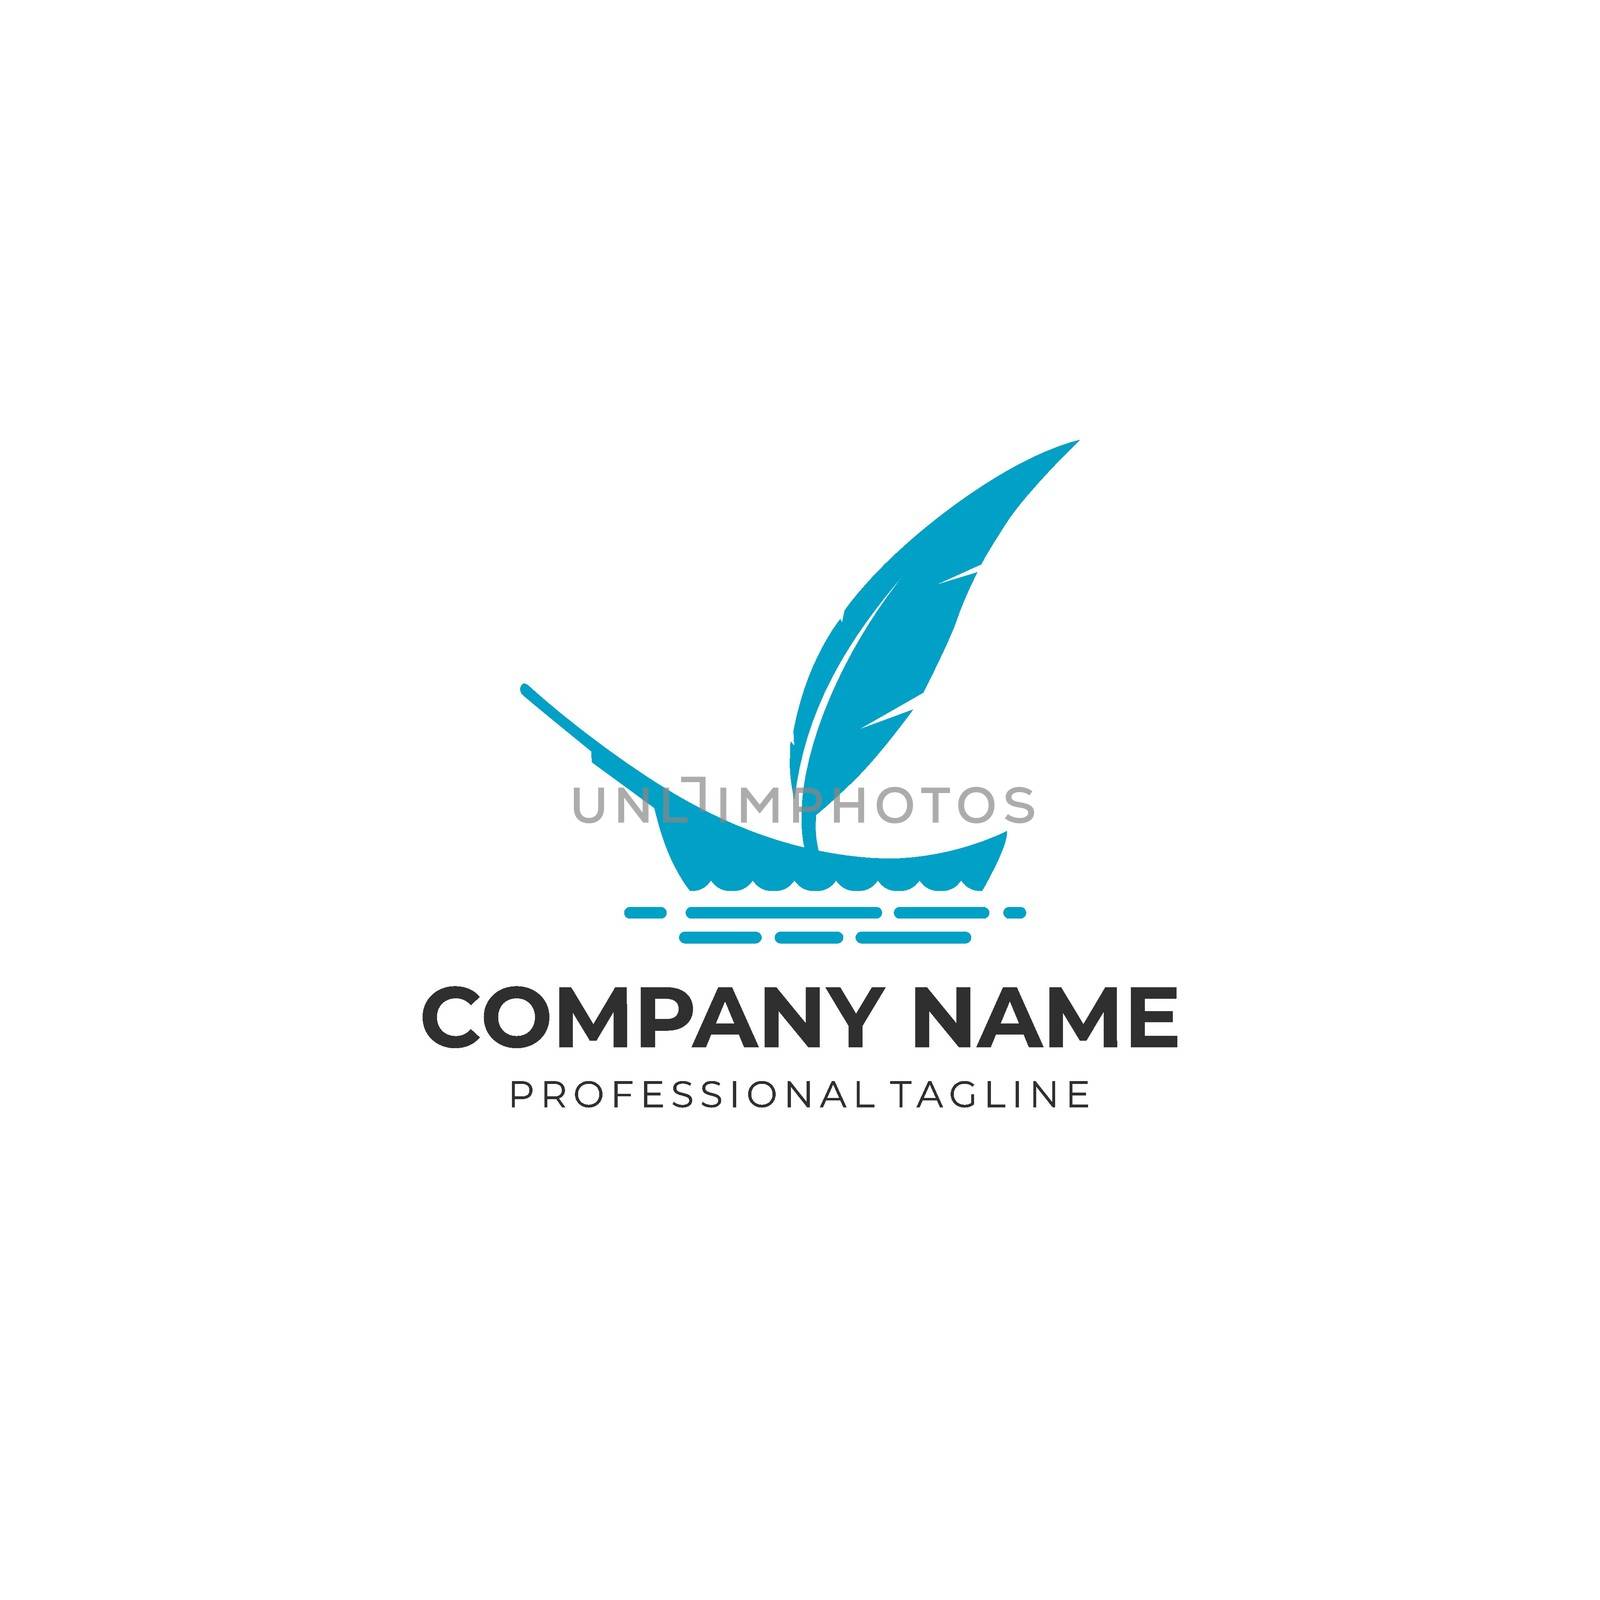 press writer journalist logo business template. sail boat and feather elements. flat design isolated on white background by IreIru